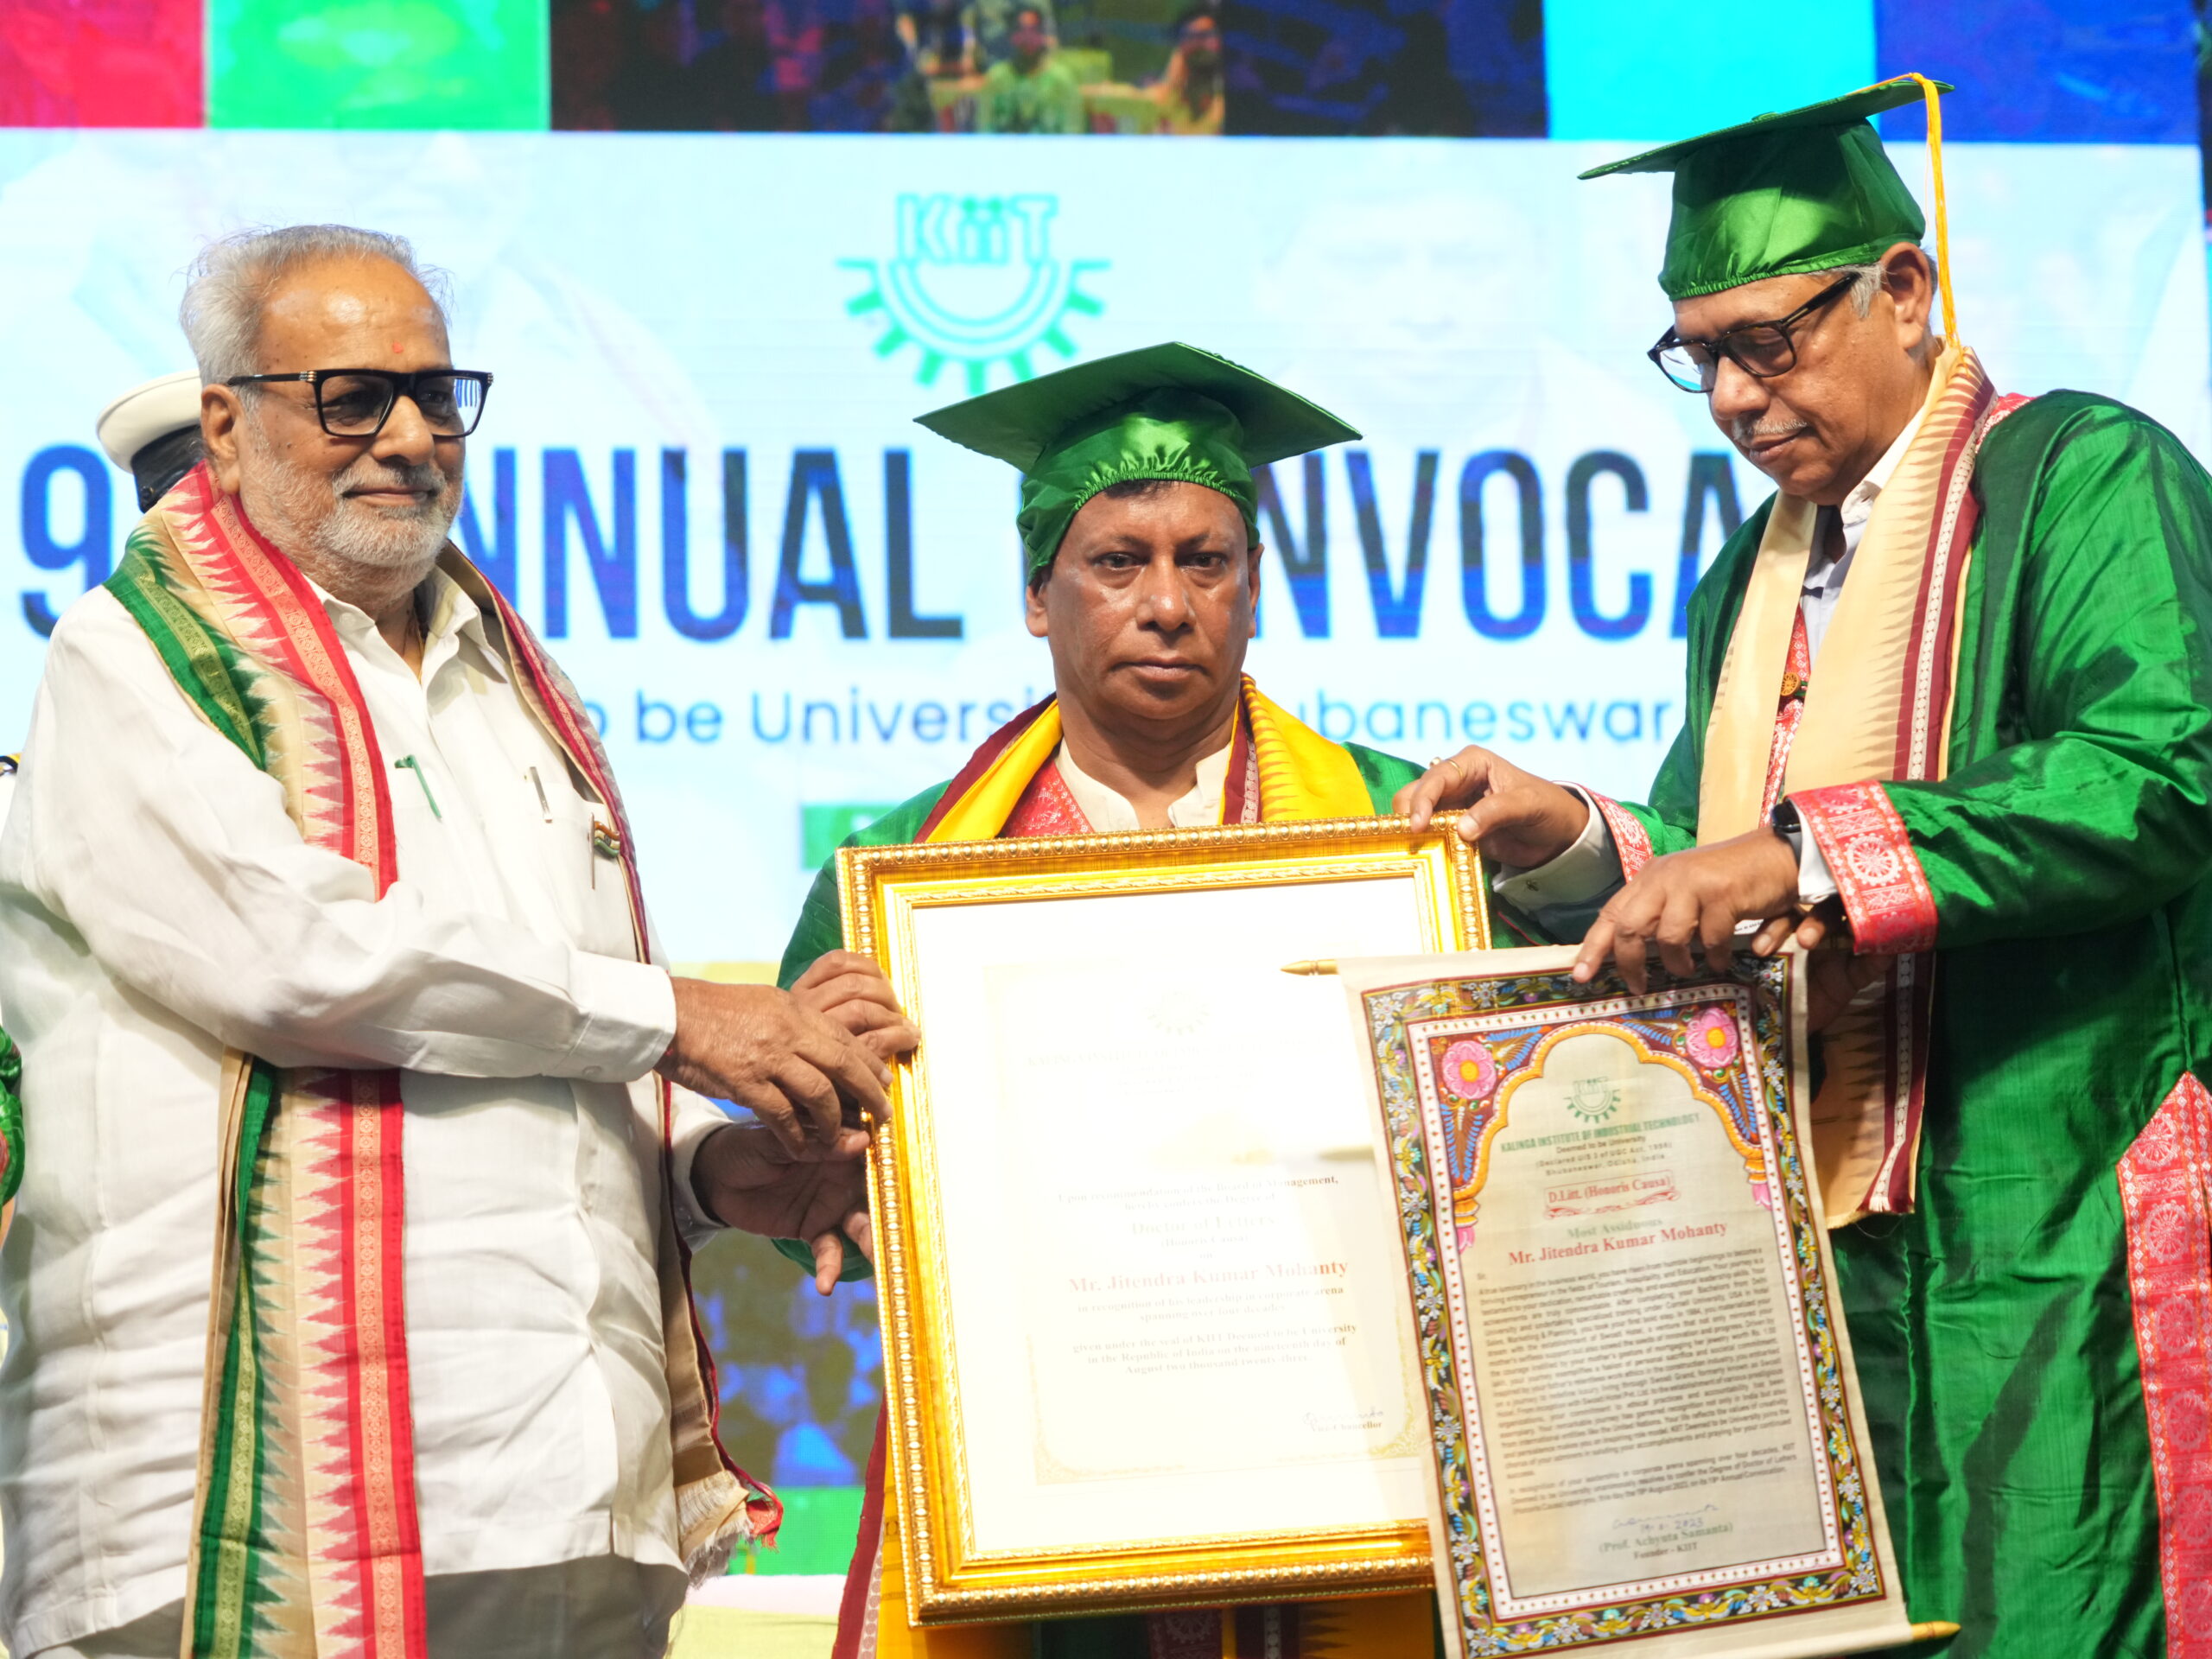 KIIT confers Doctorate on J K Mohanty for his contribution to hospitality sector in Odisha